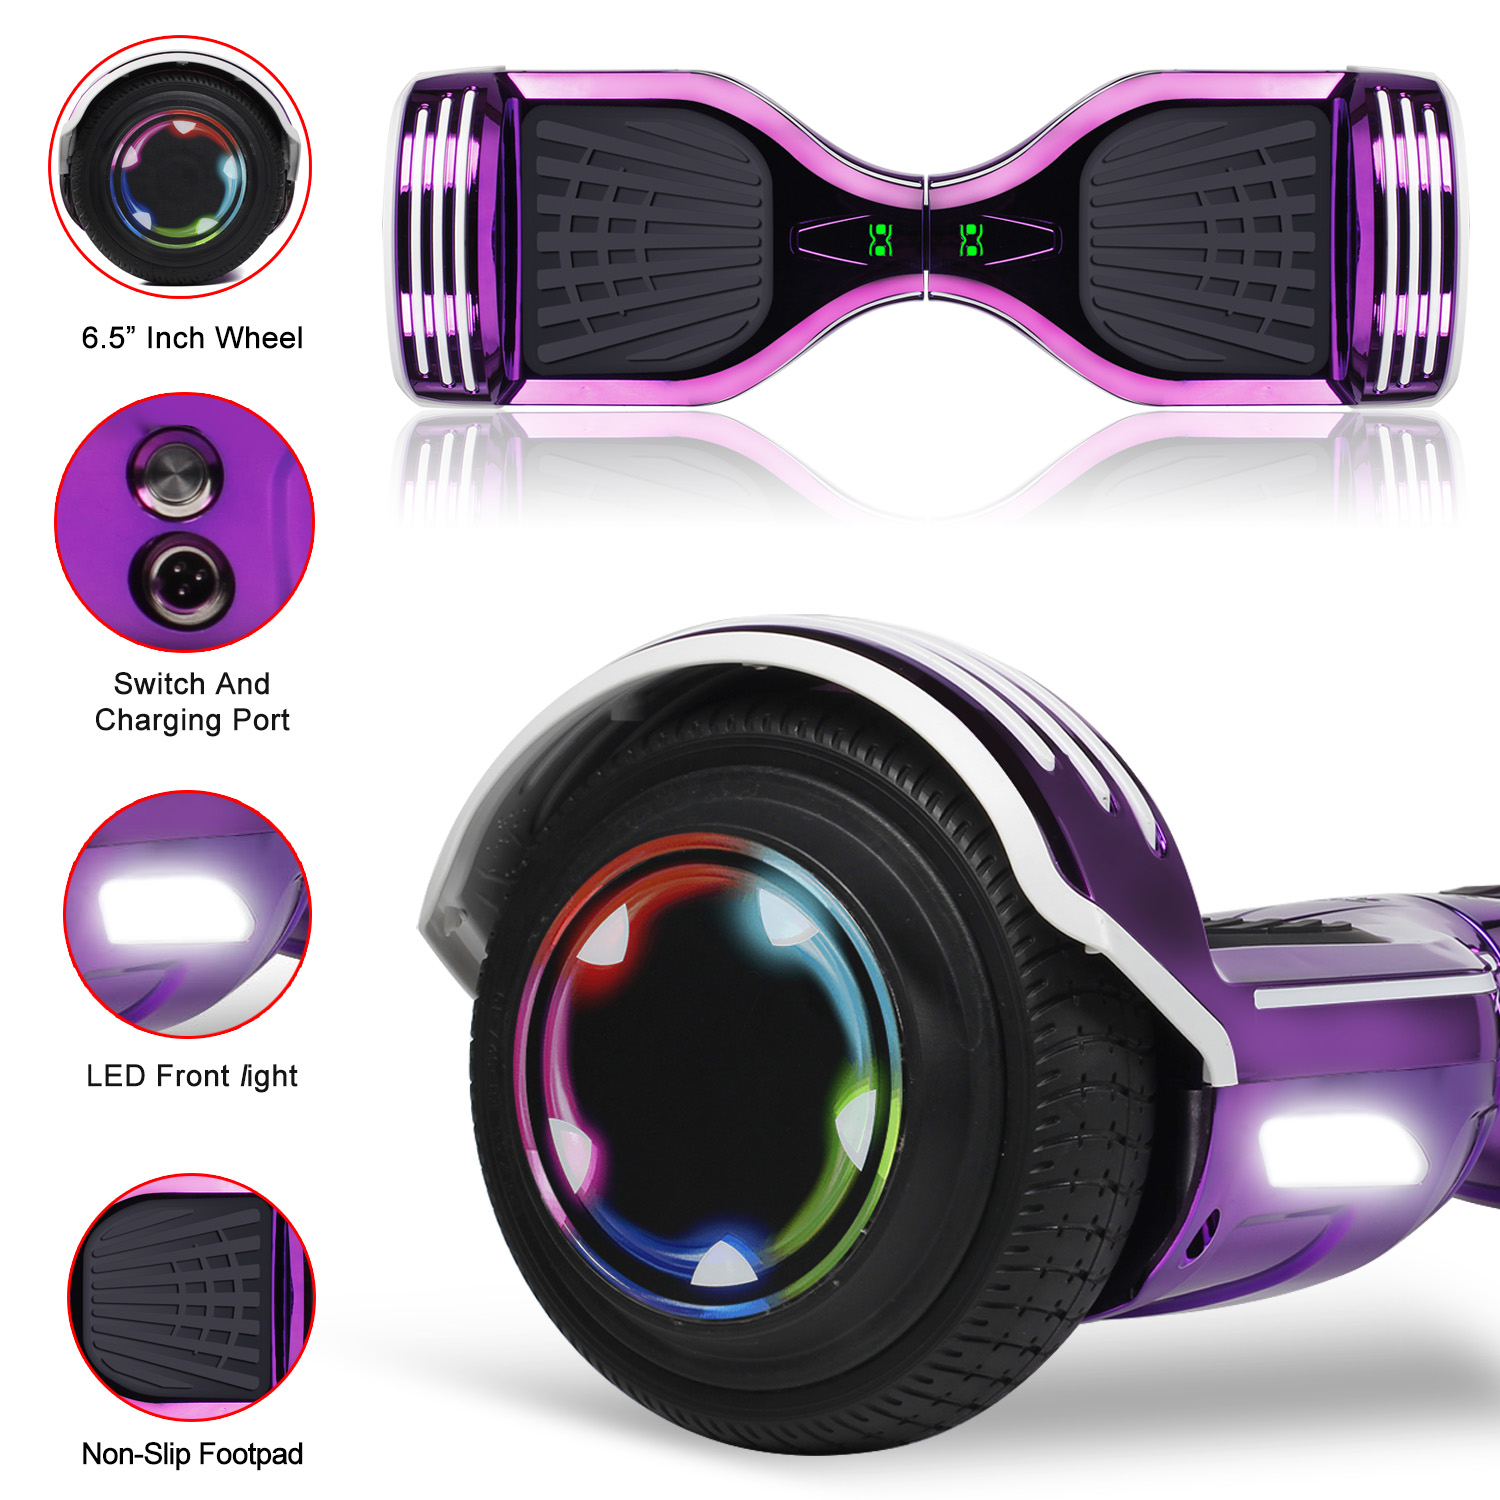 6.5" Bluetooth Hoverboard Self Balancing Scooter+Charger